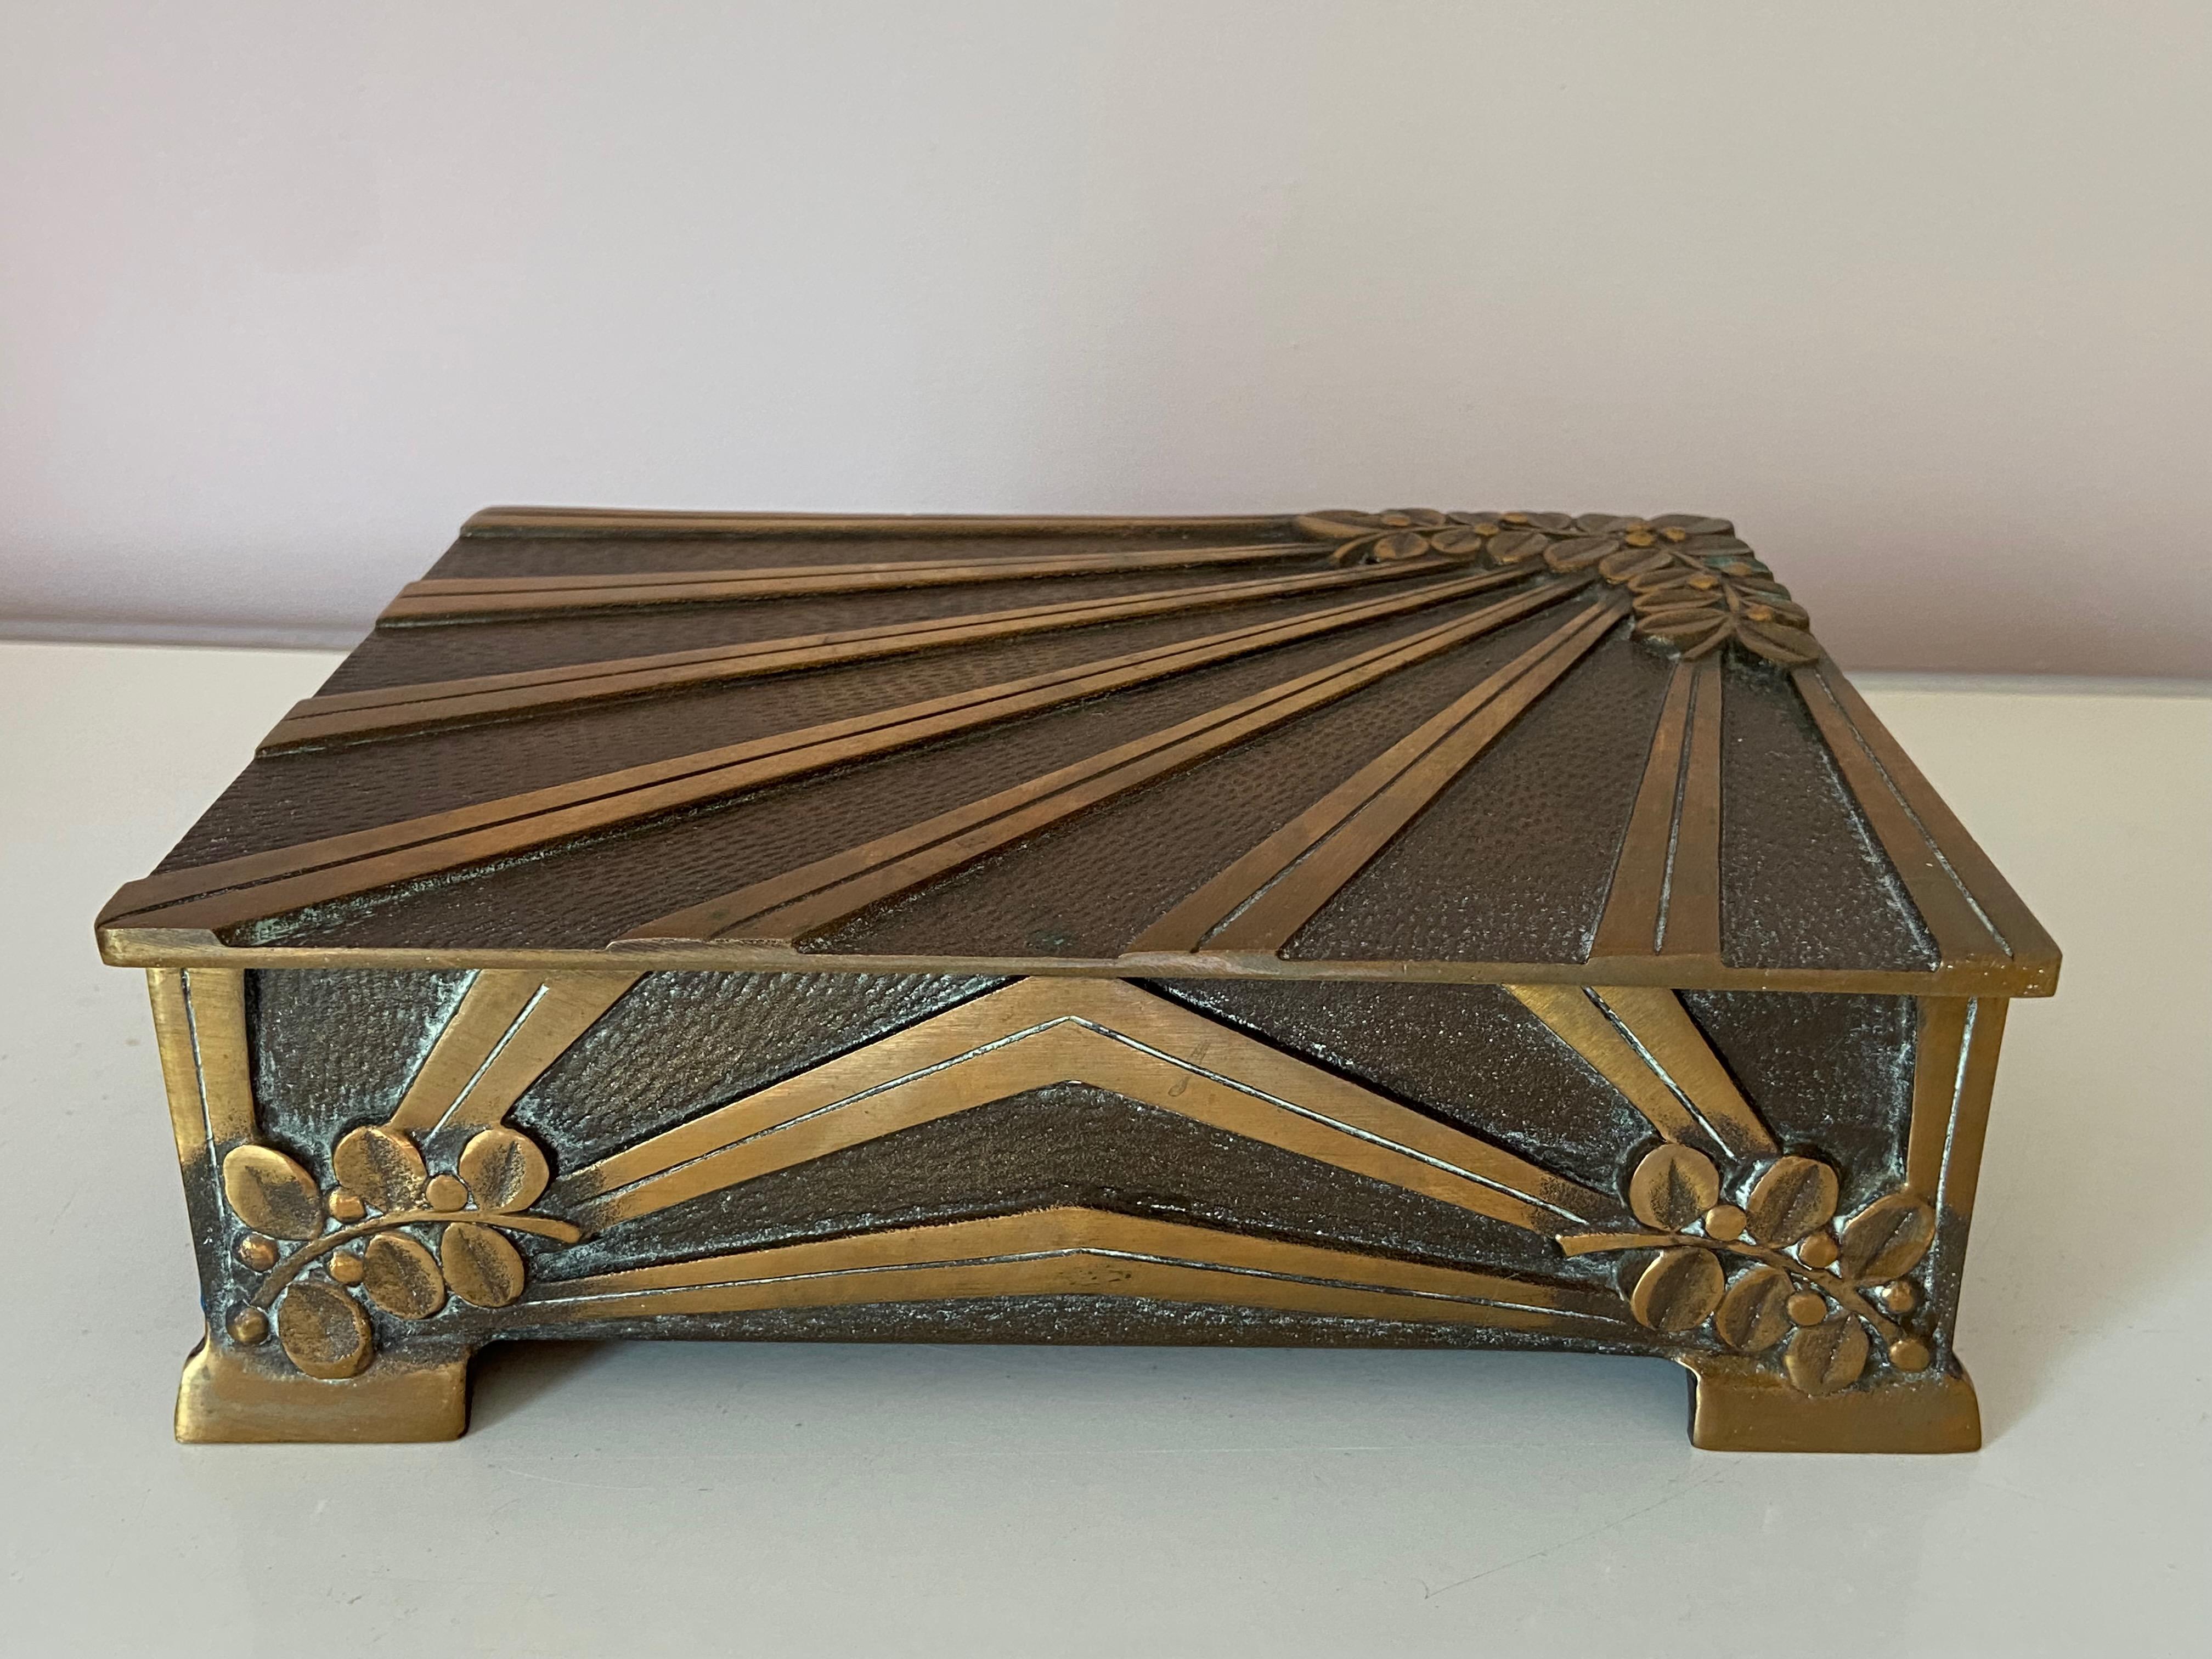 Nice bronze box by Ædel Malm, Denmark. 
No damages with beautiful patina. Price for one bronze box, one more available.
The box weights in excess of two kilos. It is signed by the maker.
 